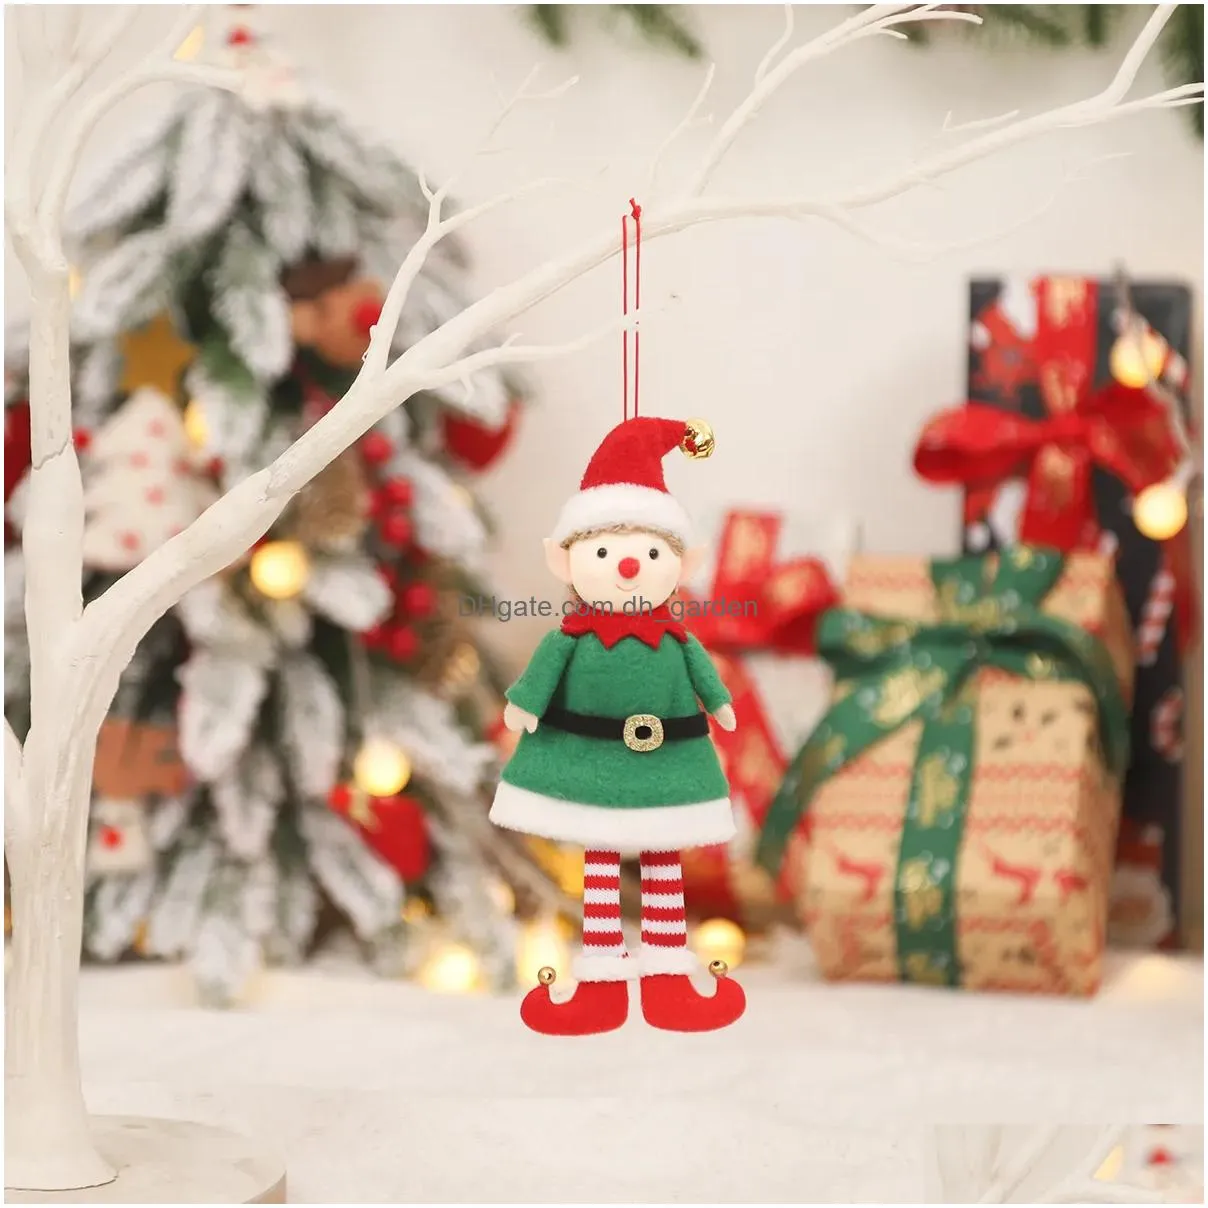 Christmas Decorations Cartoon Couple Elf Doll Pendant Christmas Tree Hanging Merry Decorations Festive Party Ornaments Xmas Dhgarden Dhjcv